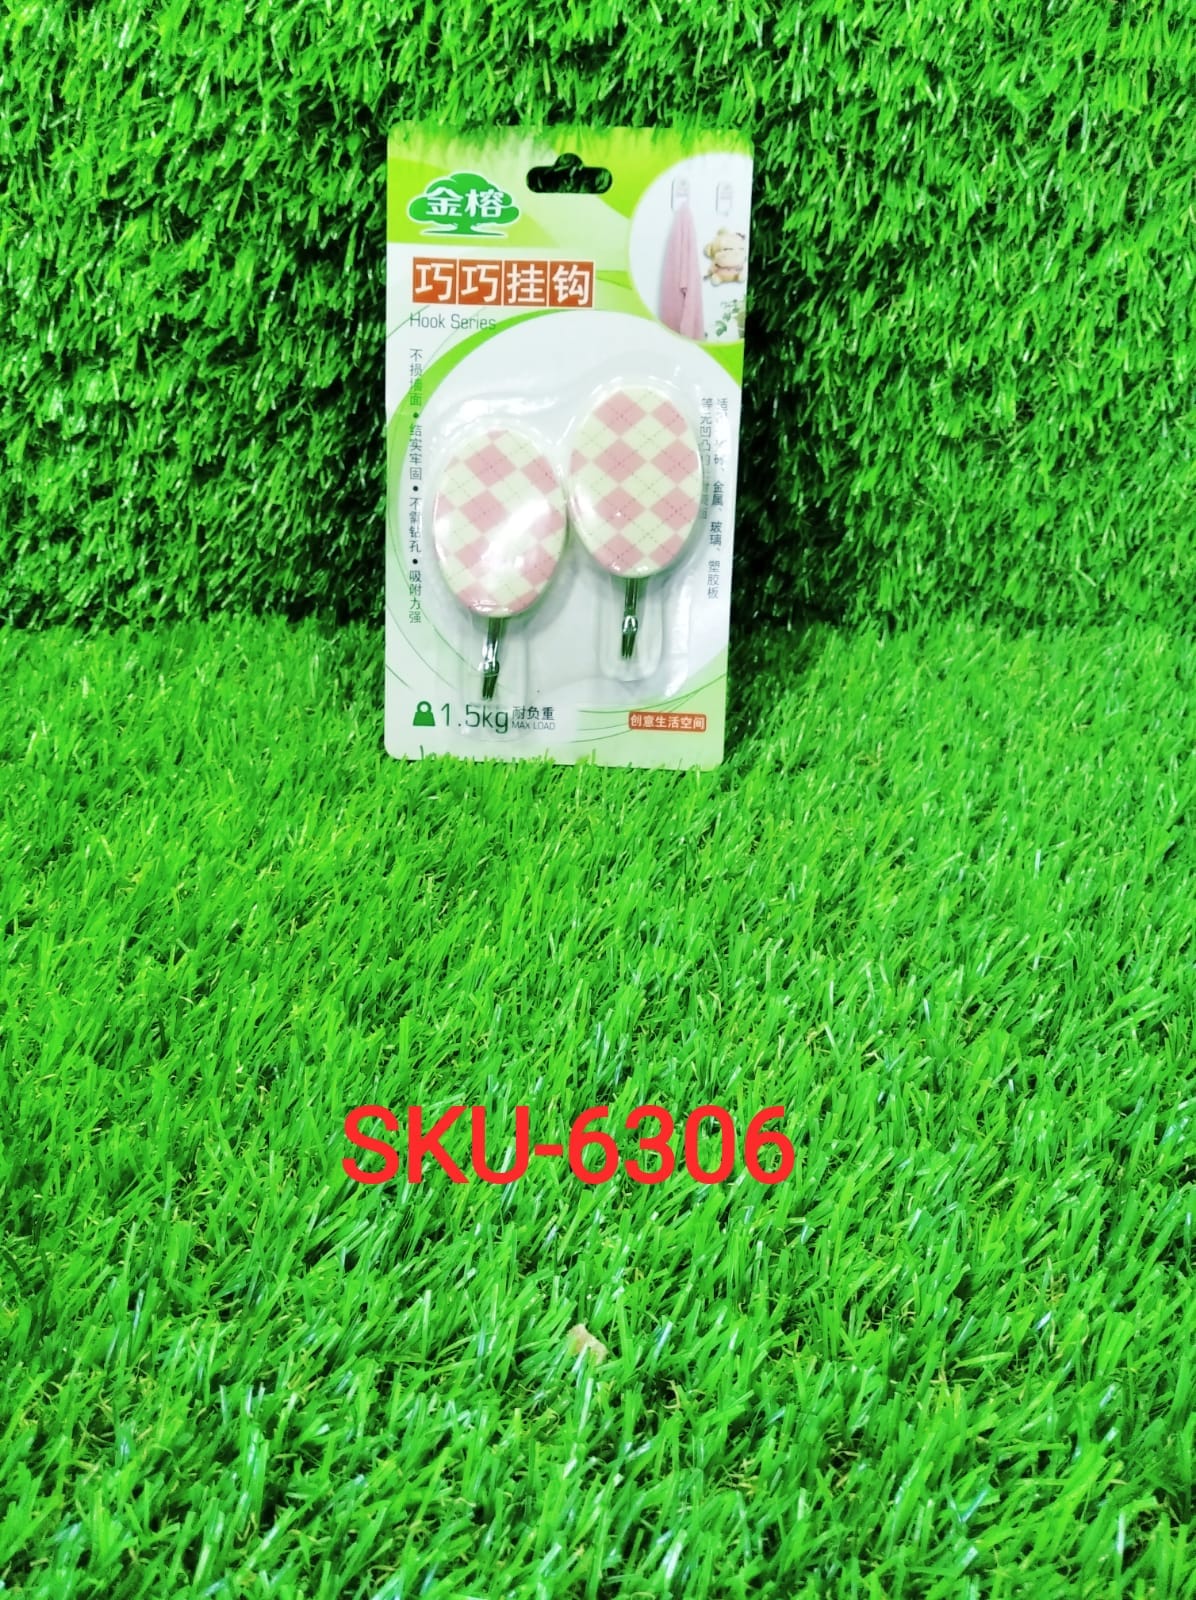 6306 2 Pc Adhesive Hook used in all kinds of household and official places specially, for hanging various cloths, stuffs and items etc.